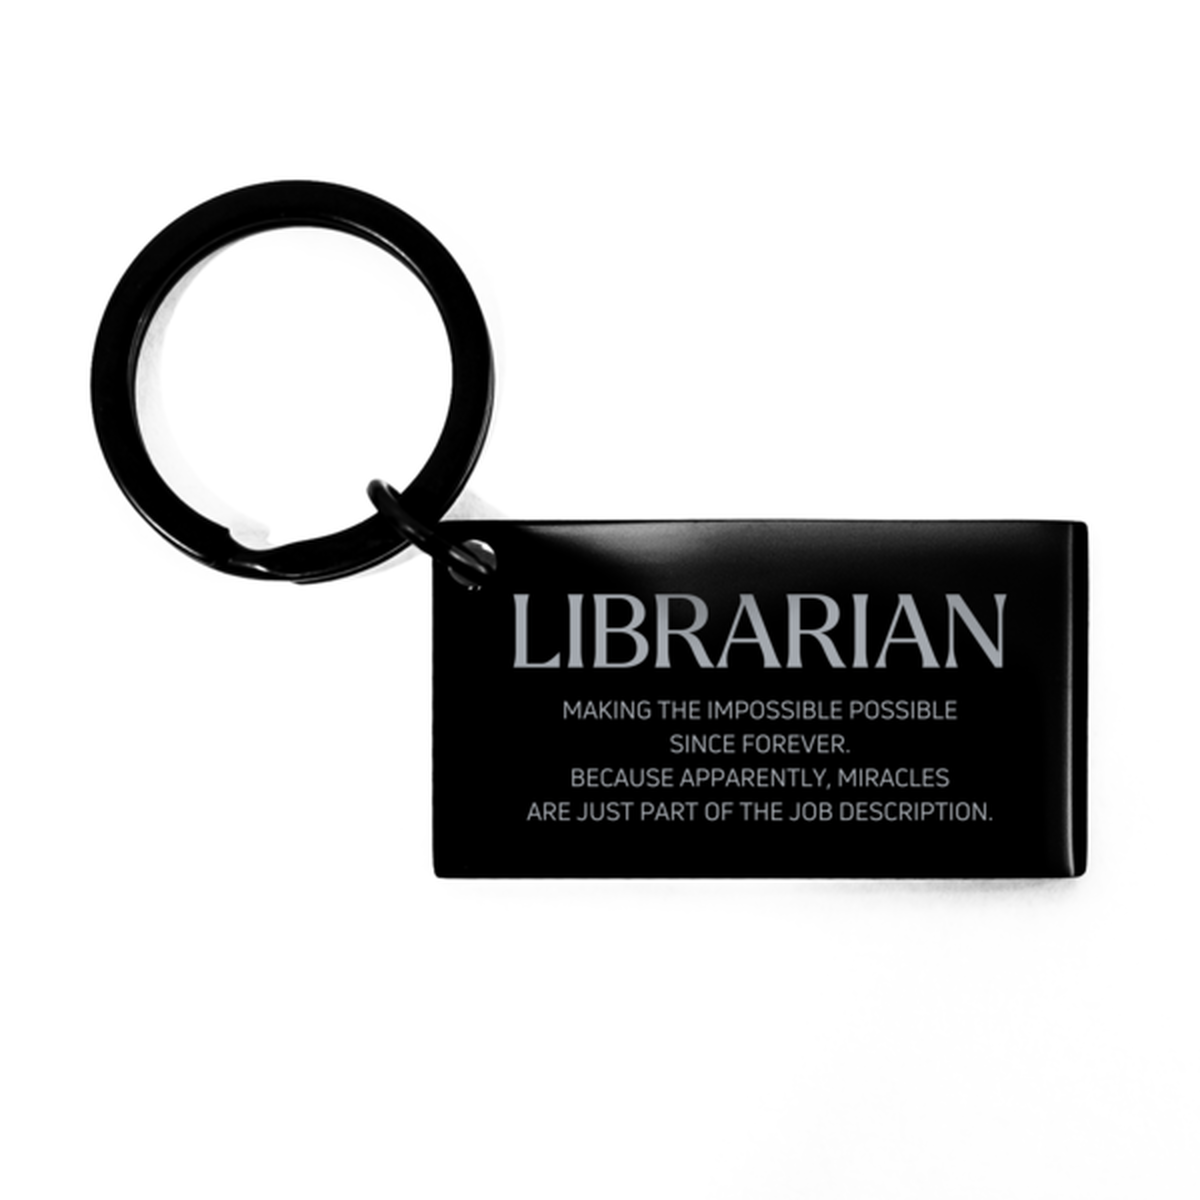 Funny Librarian Gifts, Miracles are just part of the job description, Inspirational Birthday Keychain For Librarian, Men, Women, Coworkers, Friends, Boss